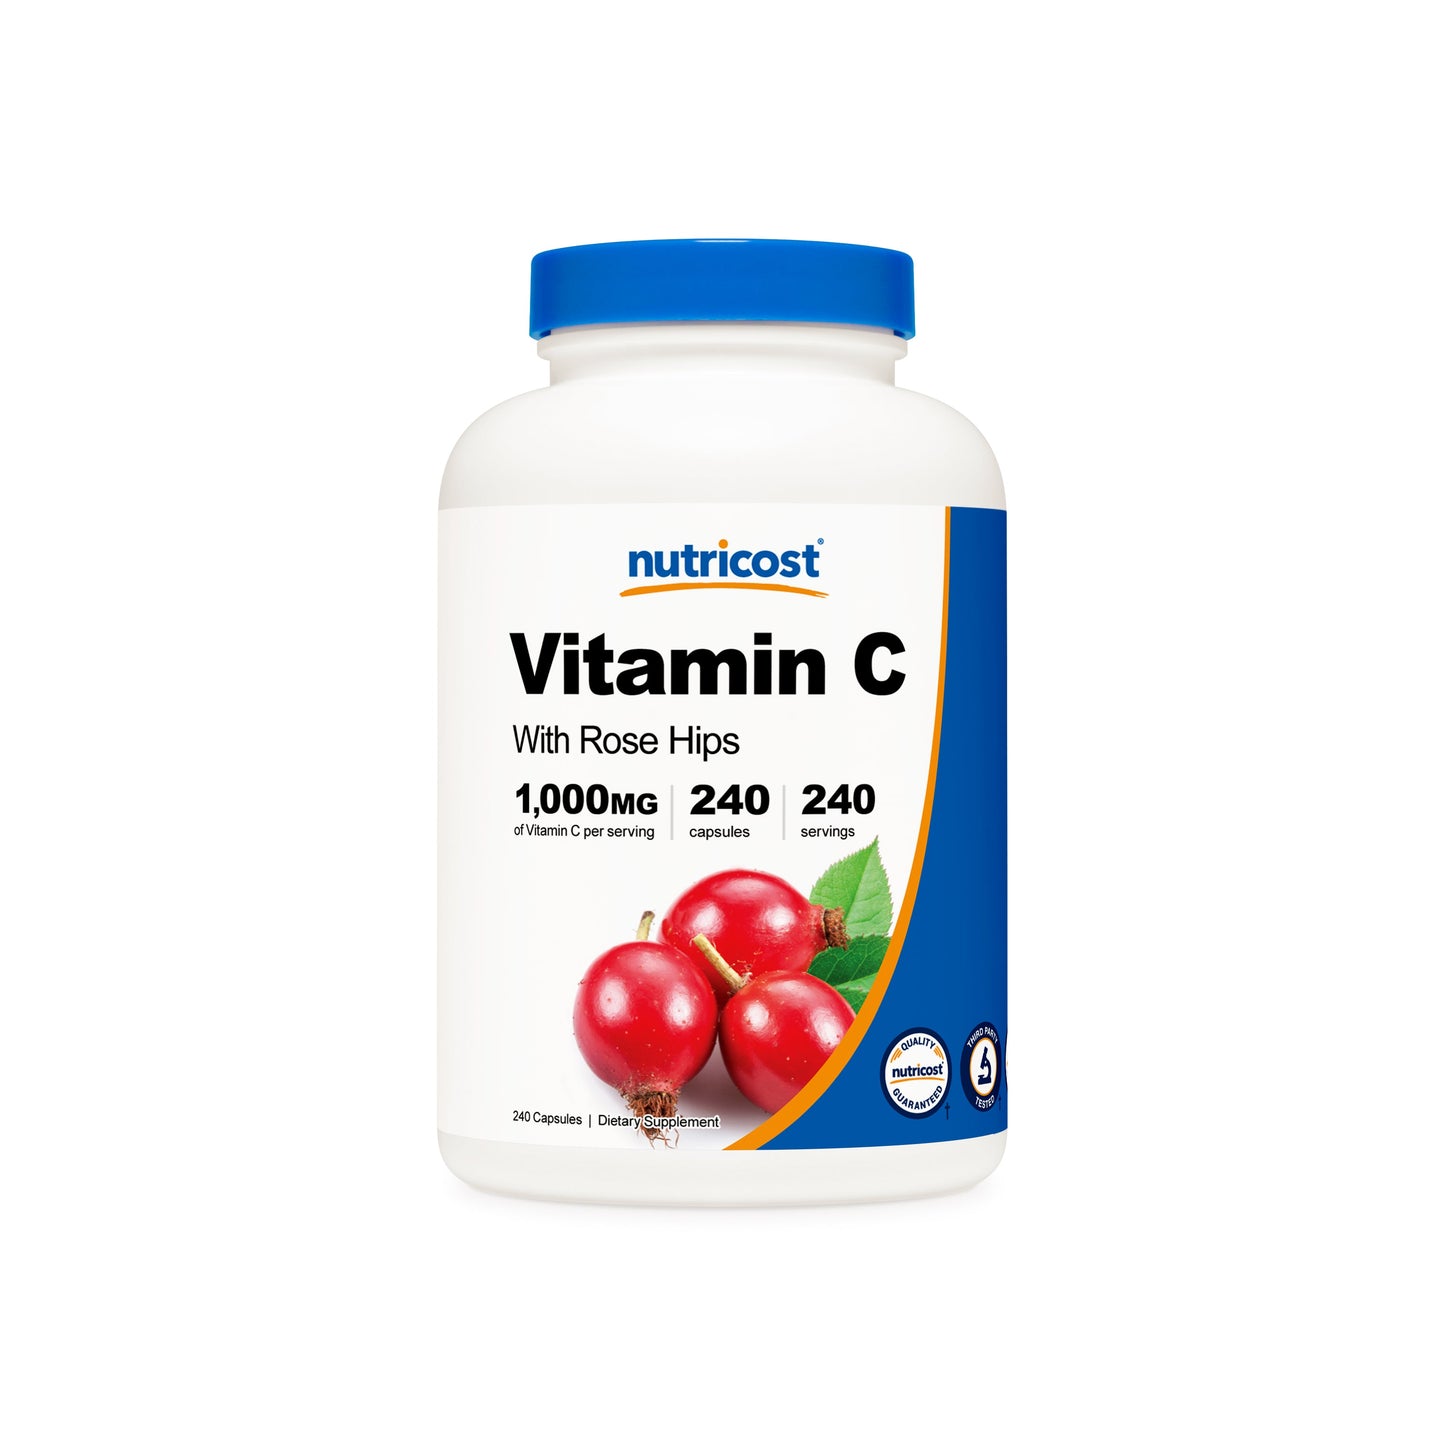 Nutricost Vitamin C with Rose Hips Capsules